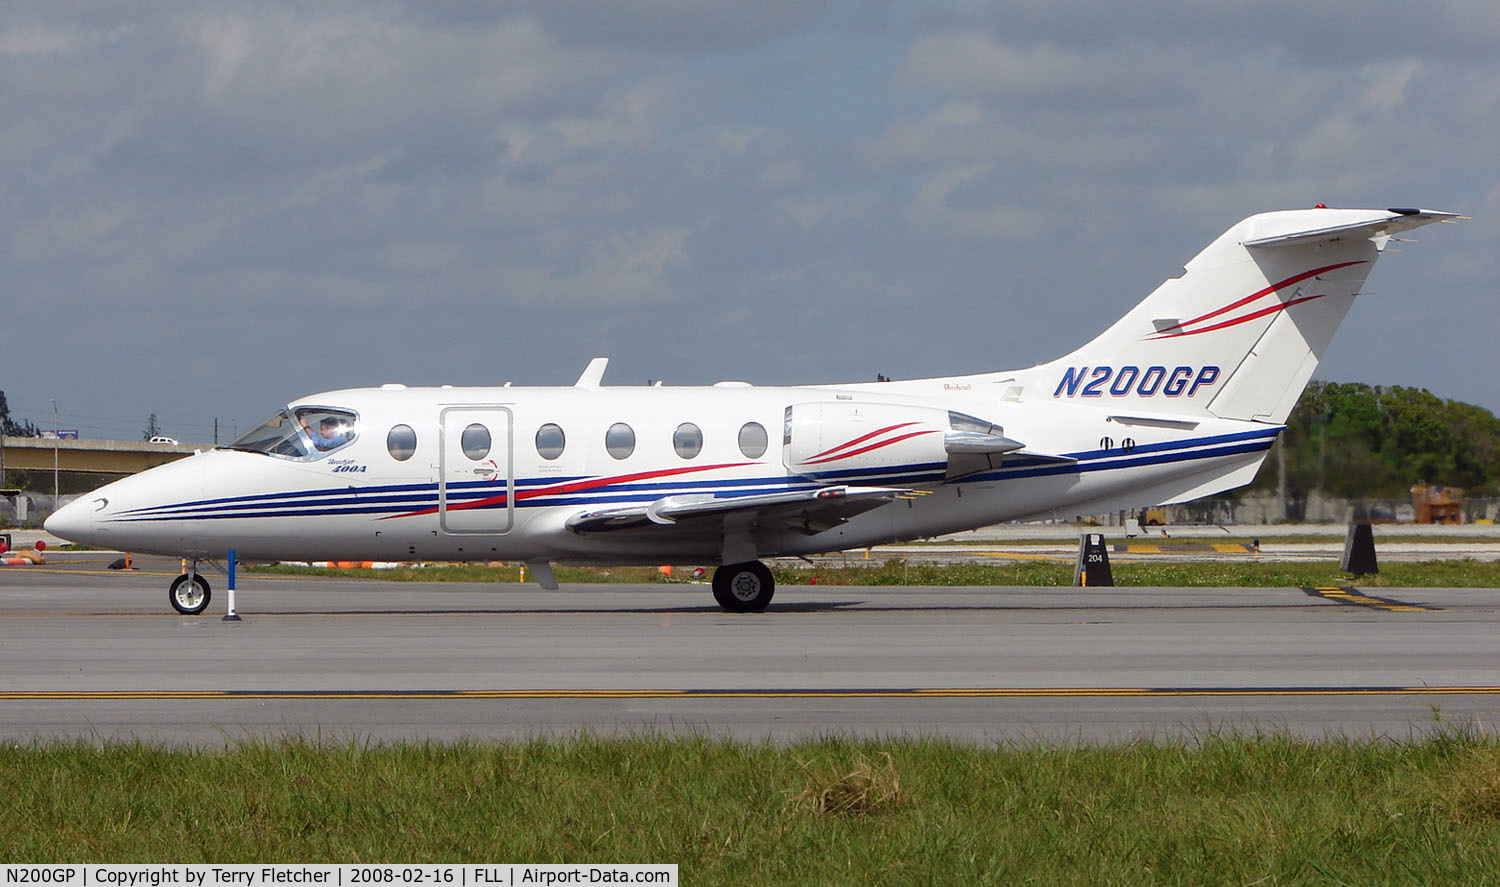 N200GP, 1997 Raytheon Aircraft Company 400A C/N RK-172, Colourful Beechjet 400 about to depart FLL